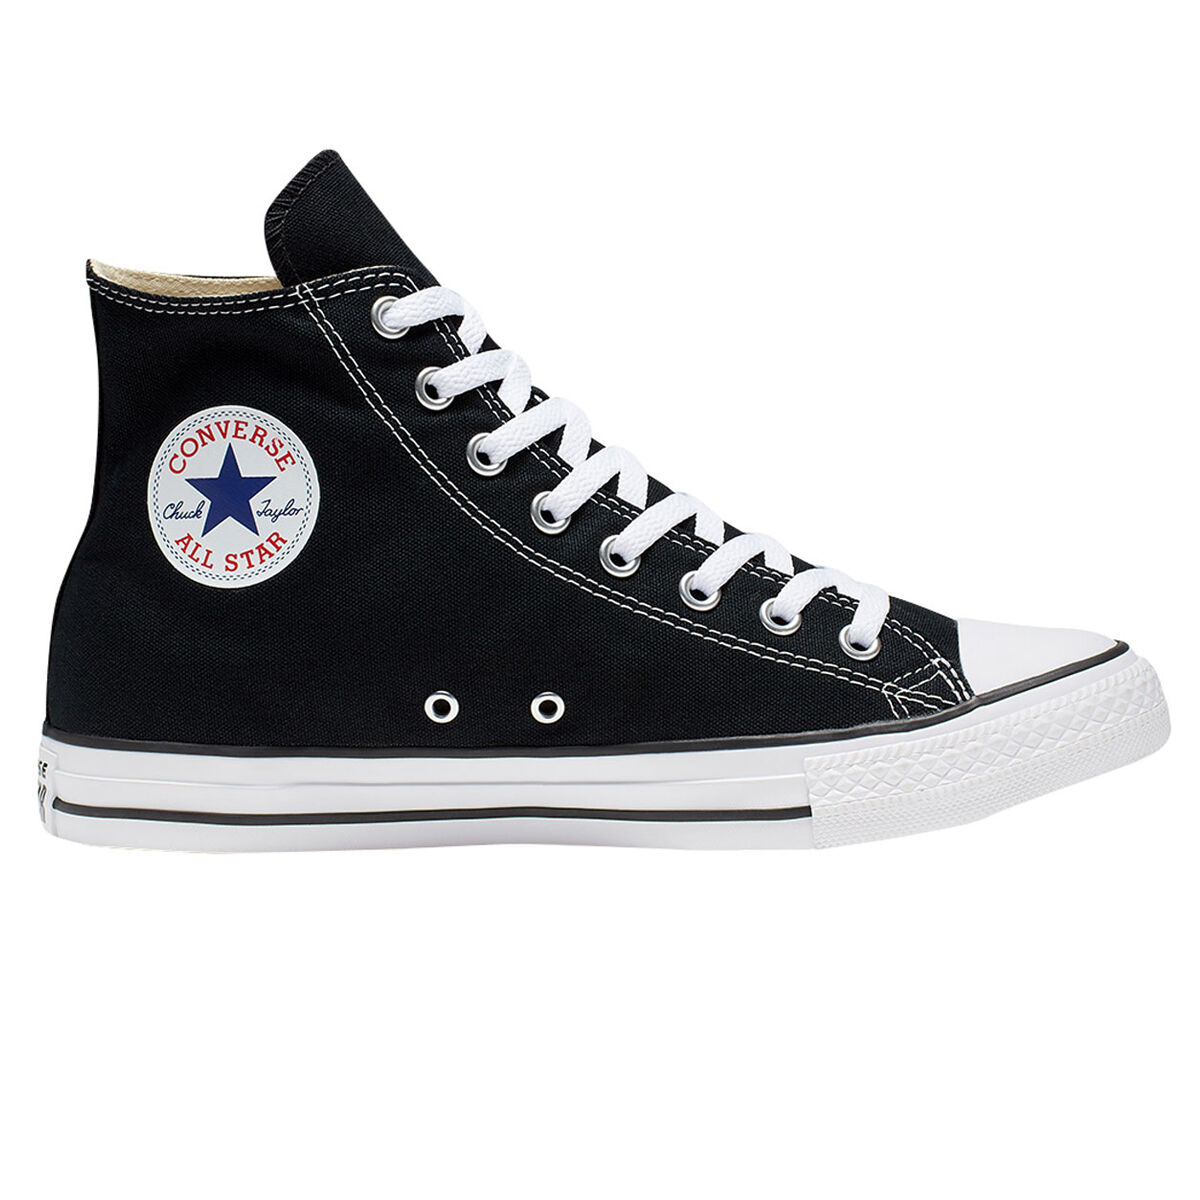 Converse Chuck Taylor All Star Hi Top Casual Shoes Black / White US 13 ...